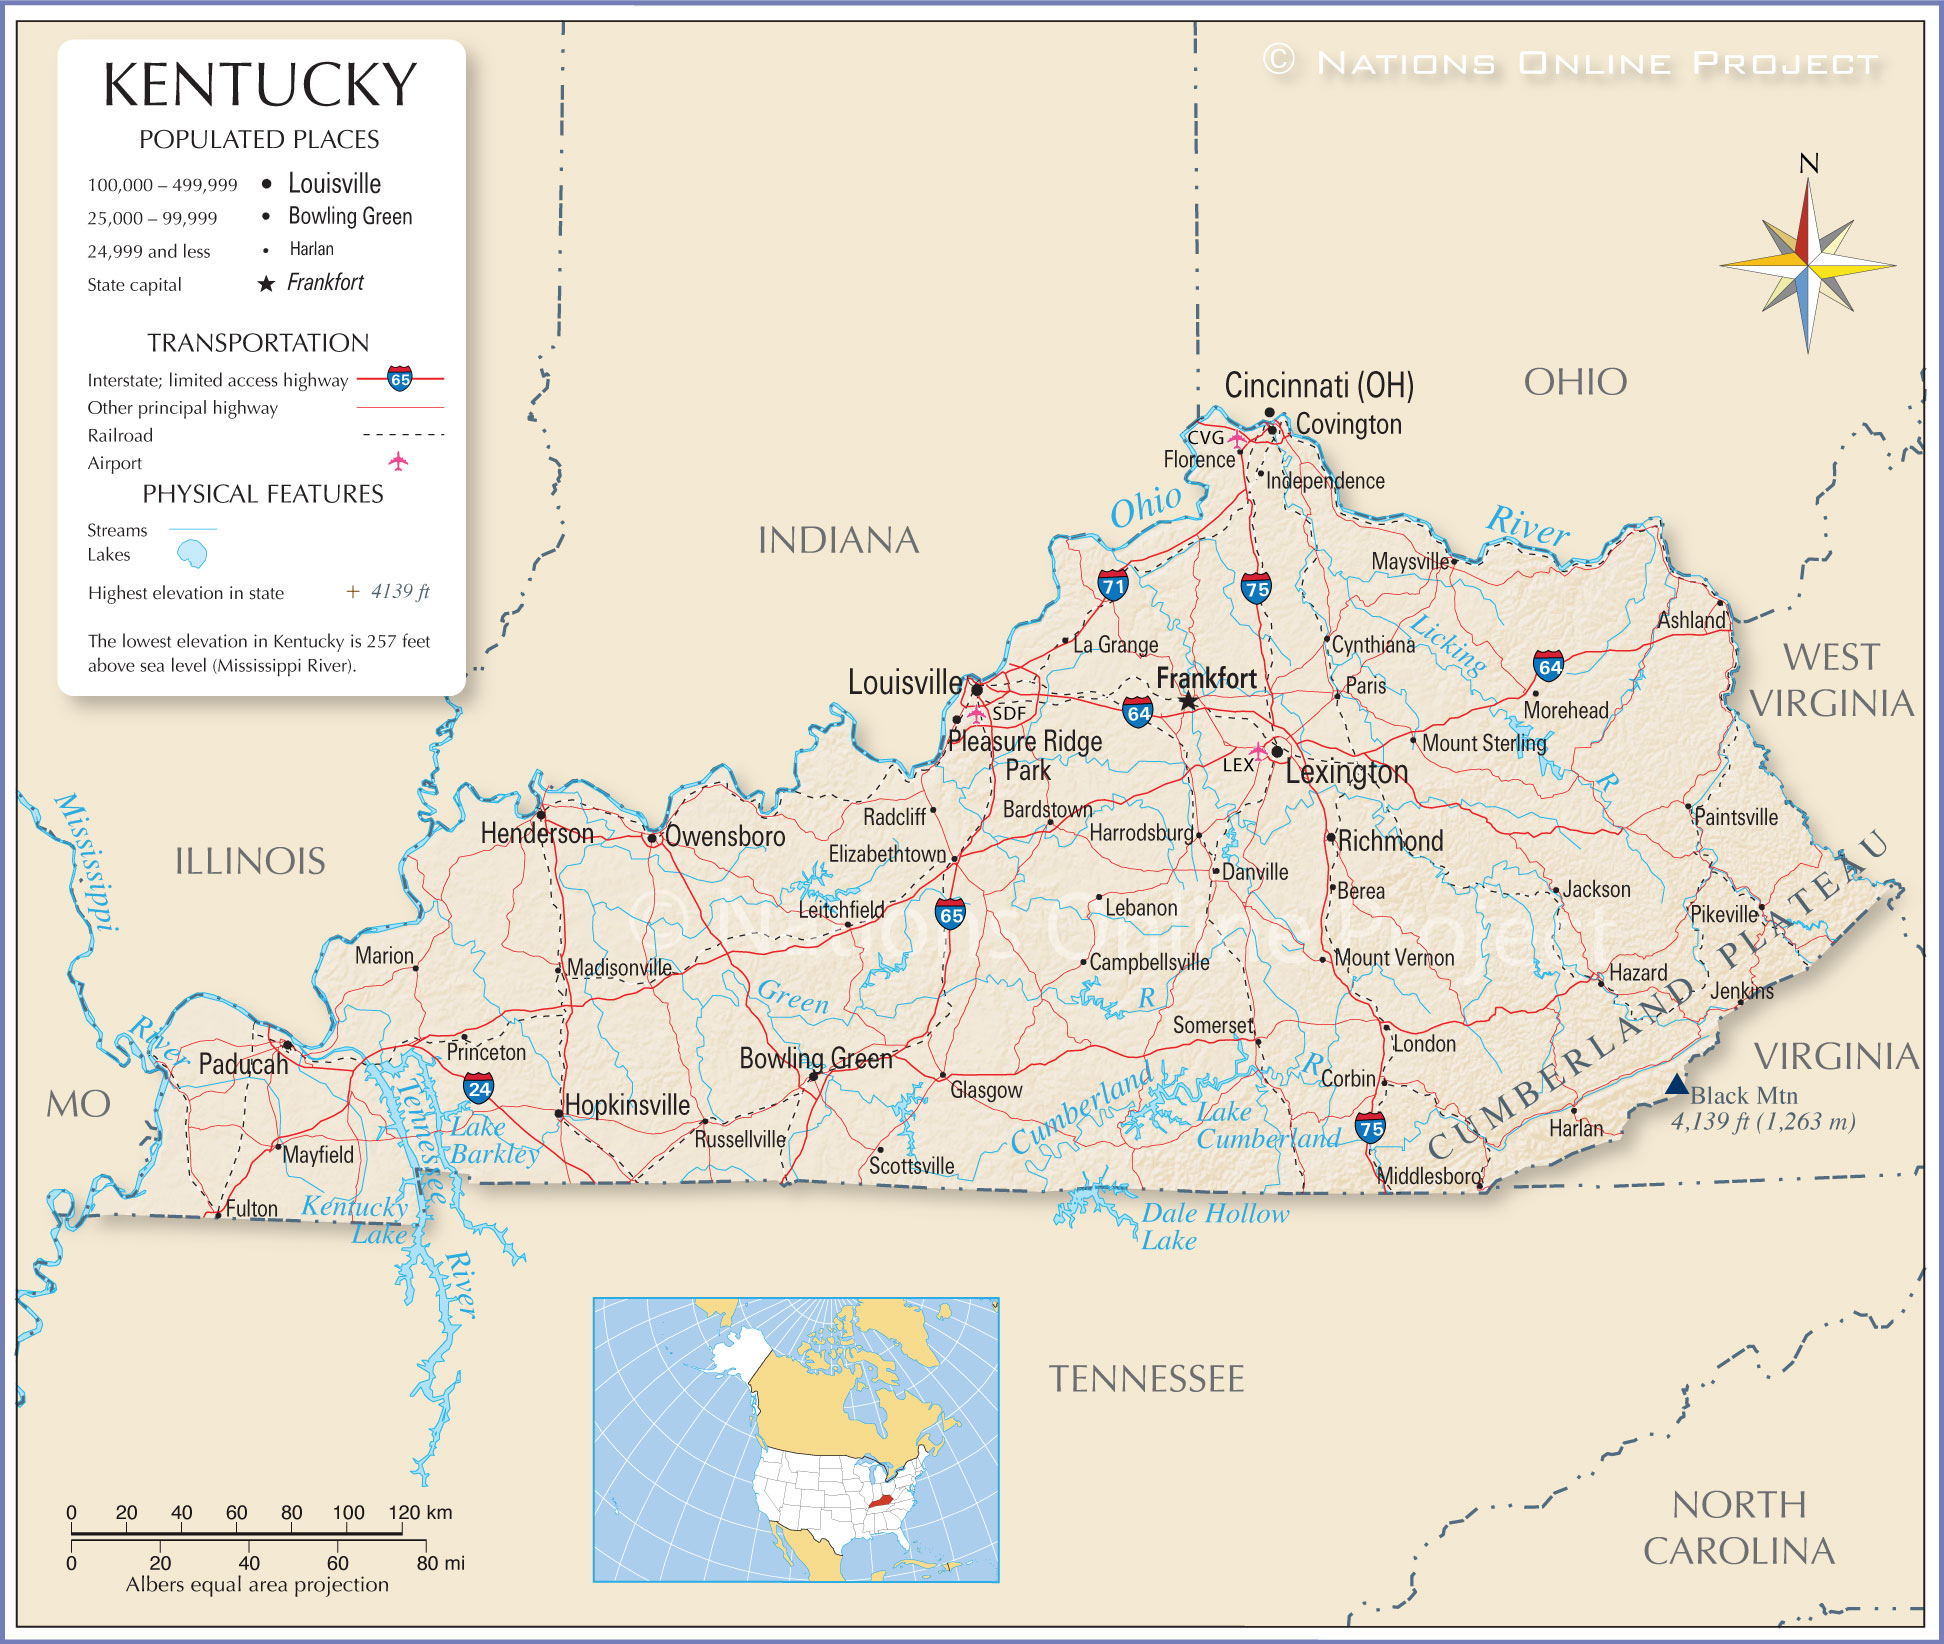 louisville ky on us map Map Of The State Of Kentucky Usa Nations Online Project louisville ky on us map